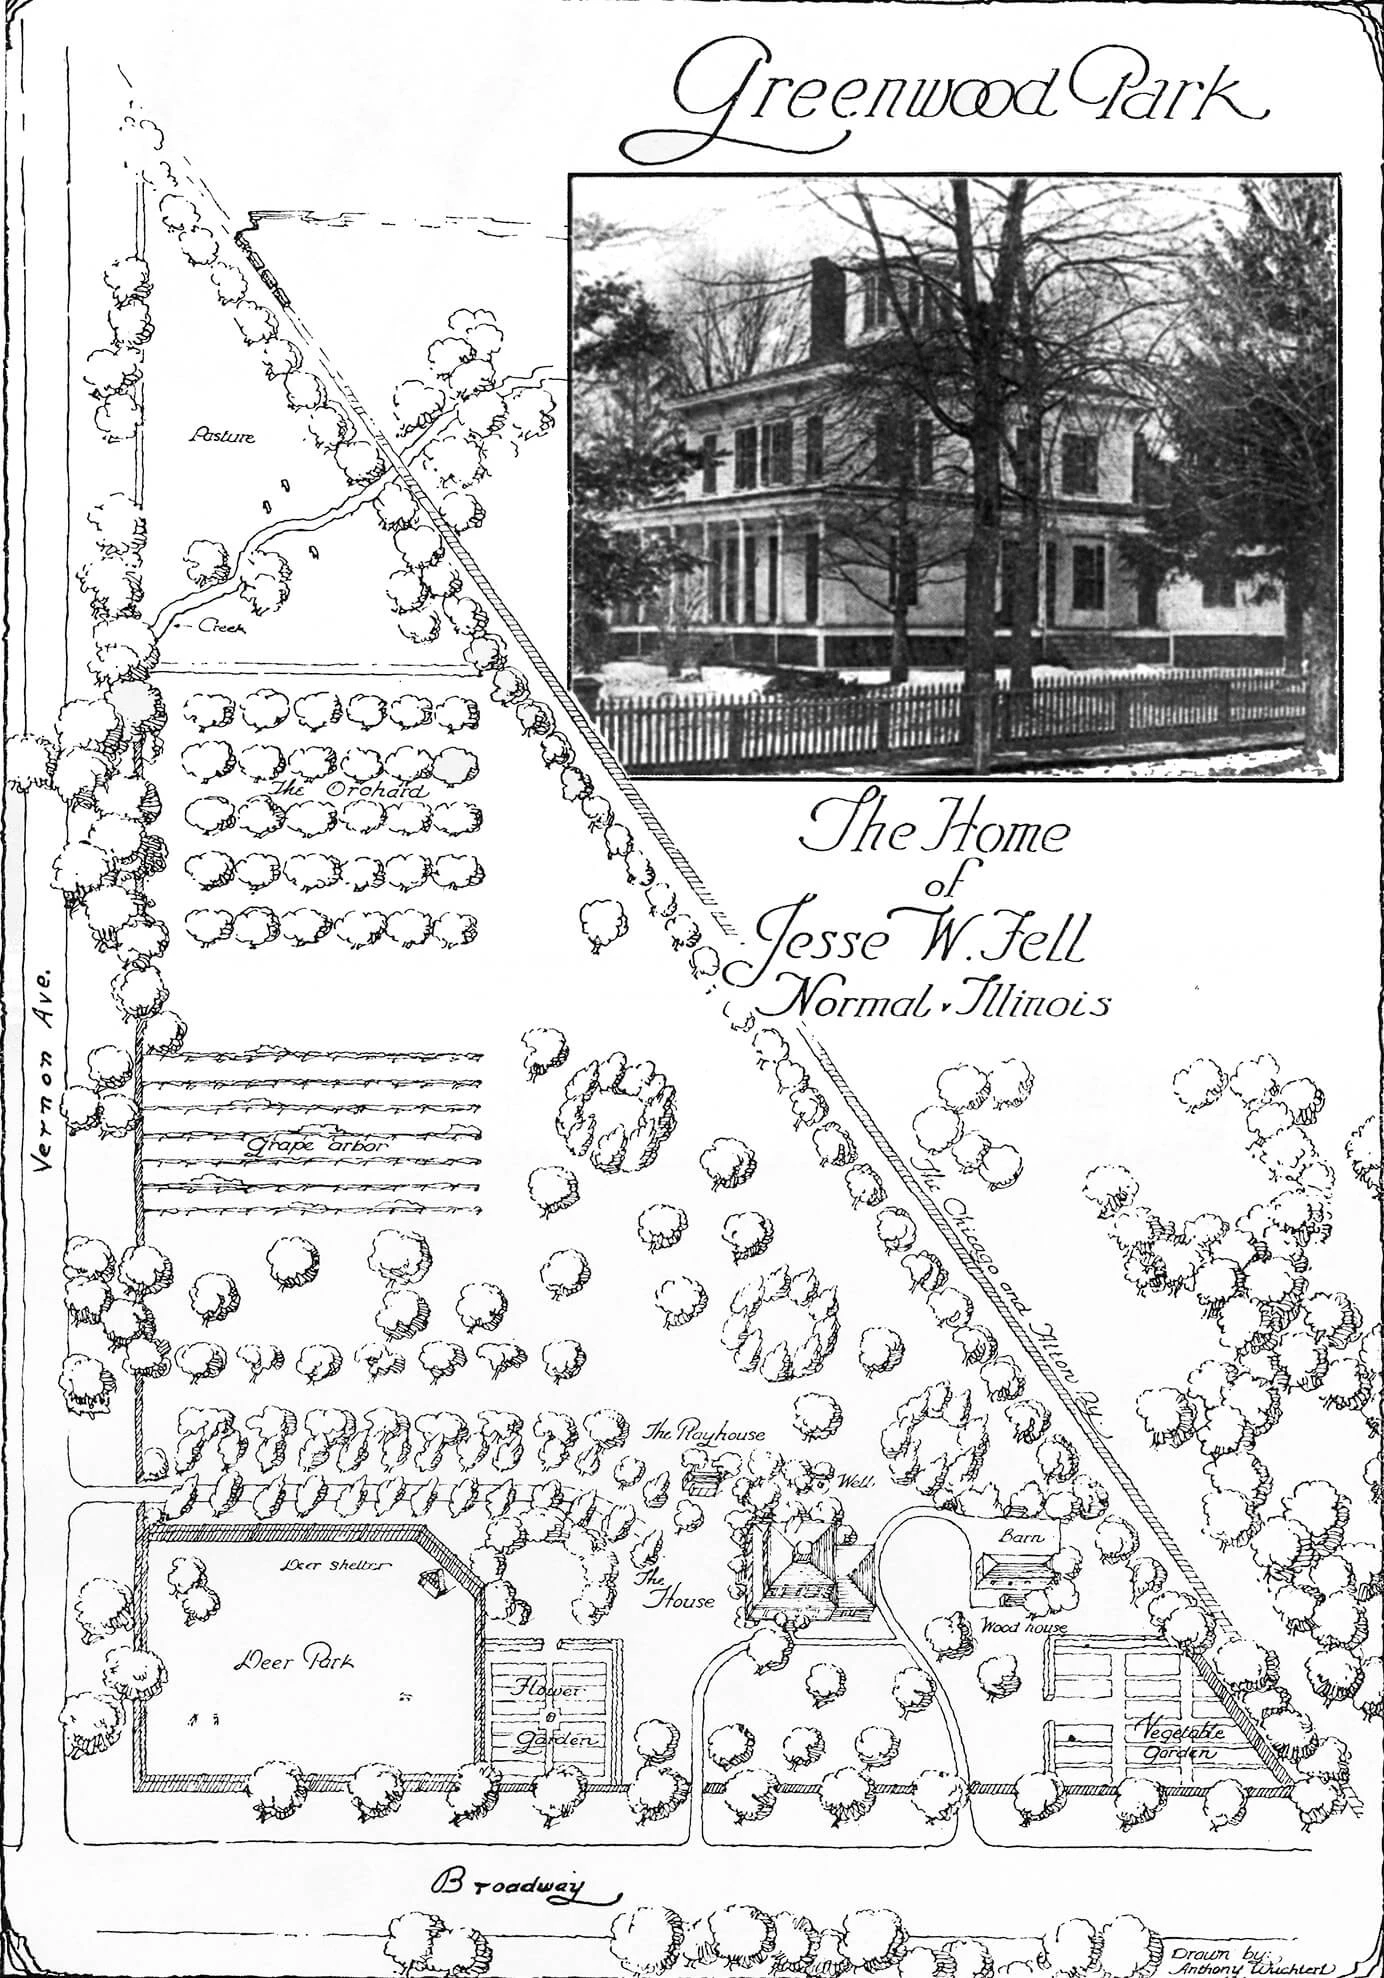 A drawn plat map for Greenwood Park, the neighborhood in which the Fell family lived. A picture of the two story frame home is in the upper corner.